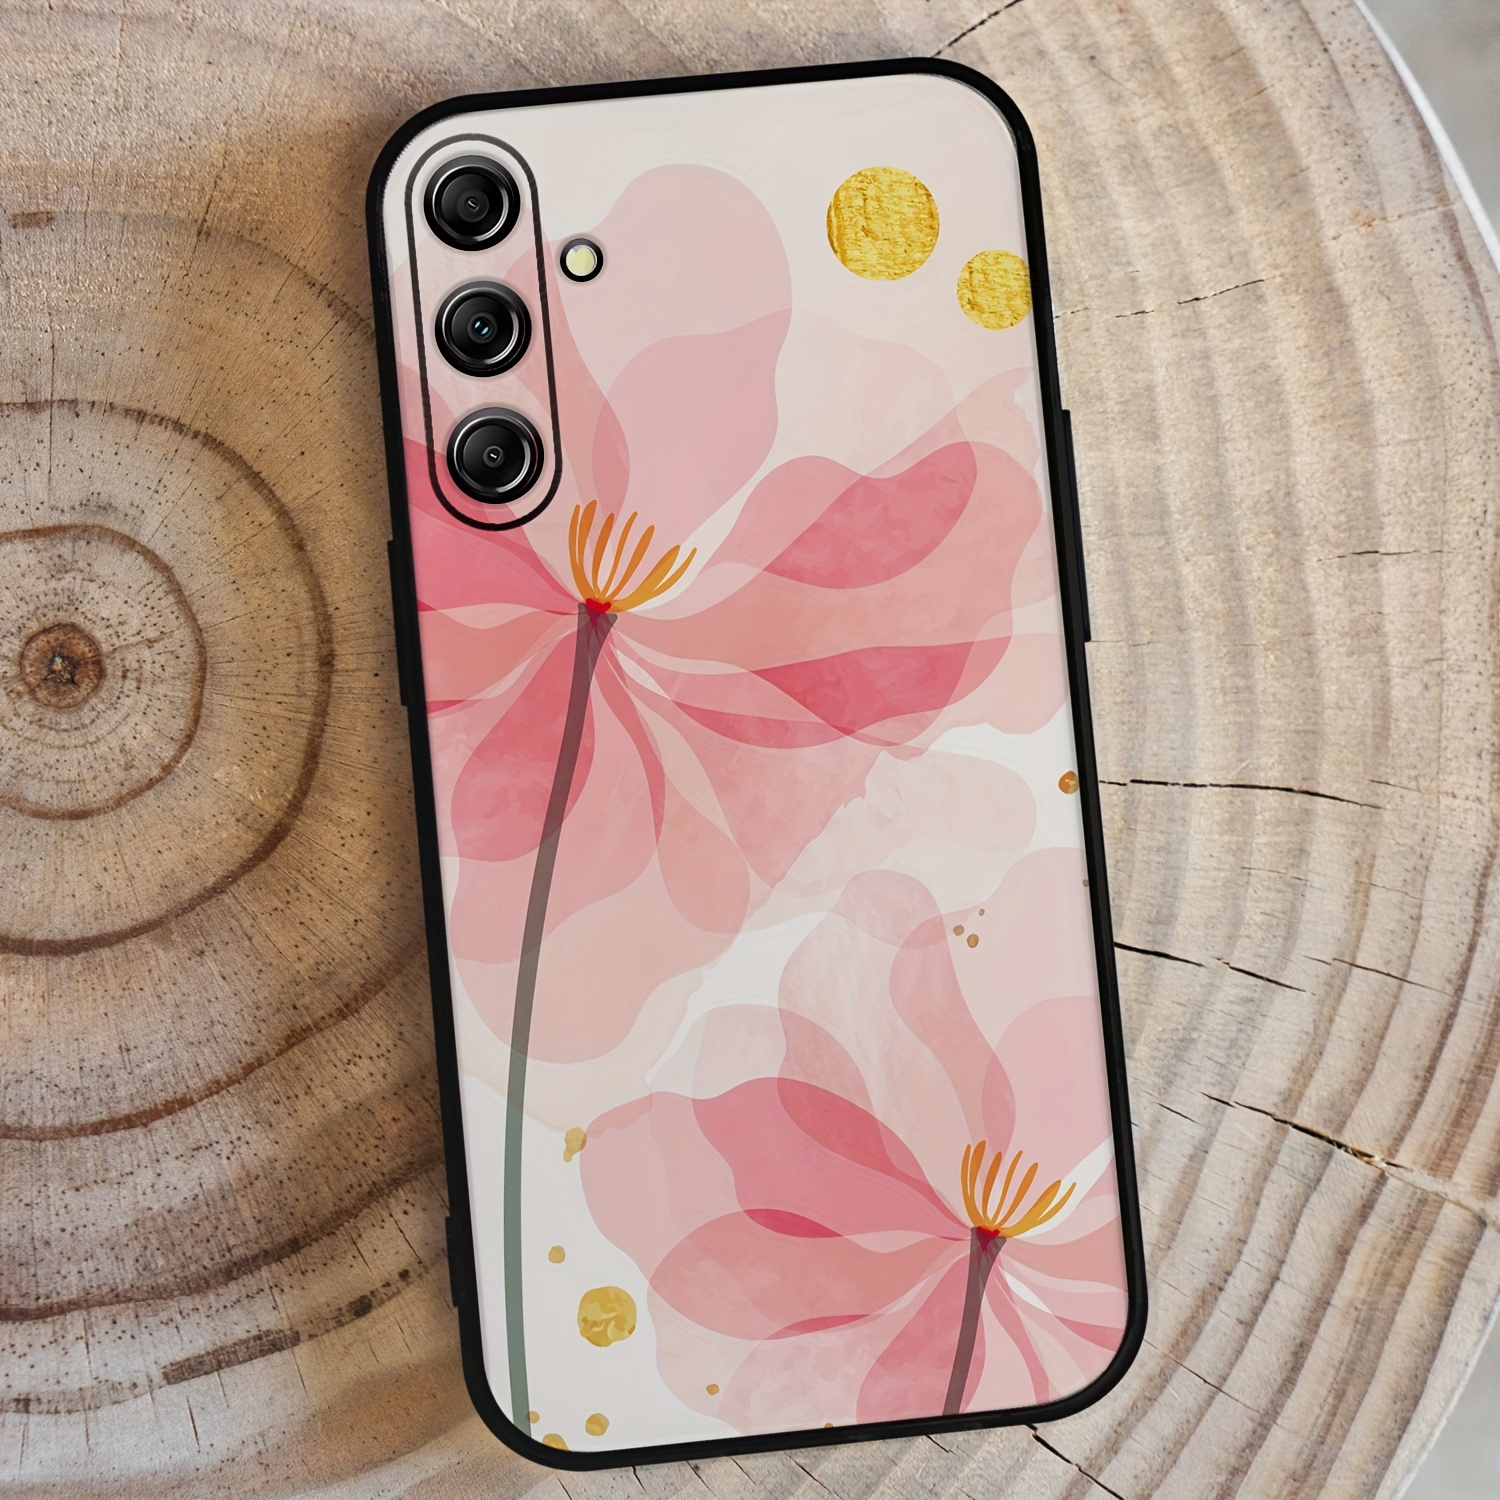 

Watercolor Pink Flower Floral Pattern Suitable For Samsung Galaxy M S 4g 5g 01 10 11 20 21 30 32 33 40 52 53 62 Global Edition Tpu Material Phone Case